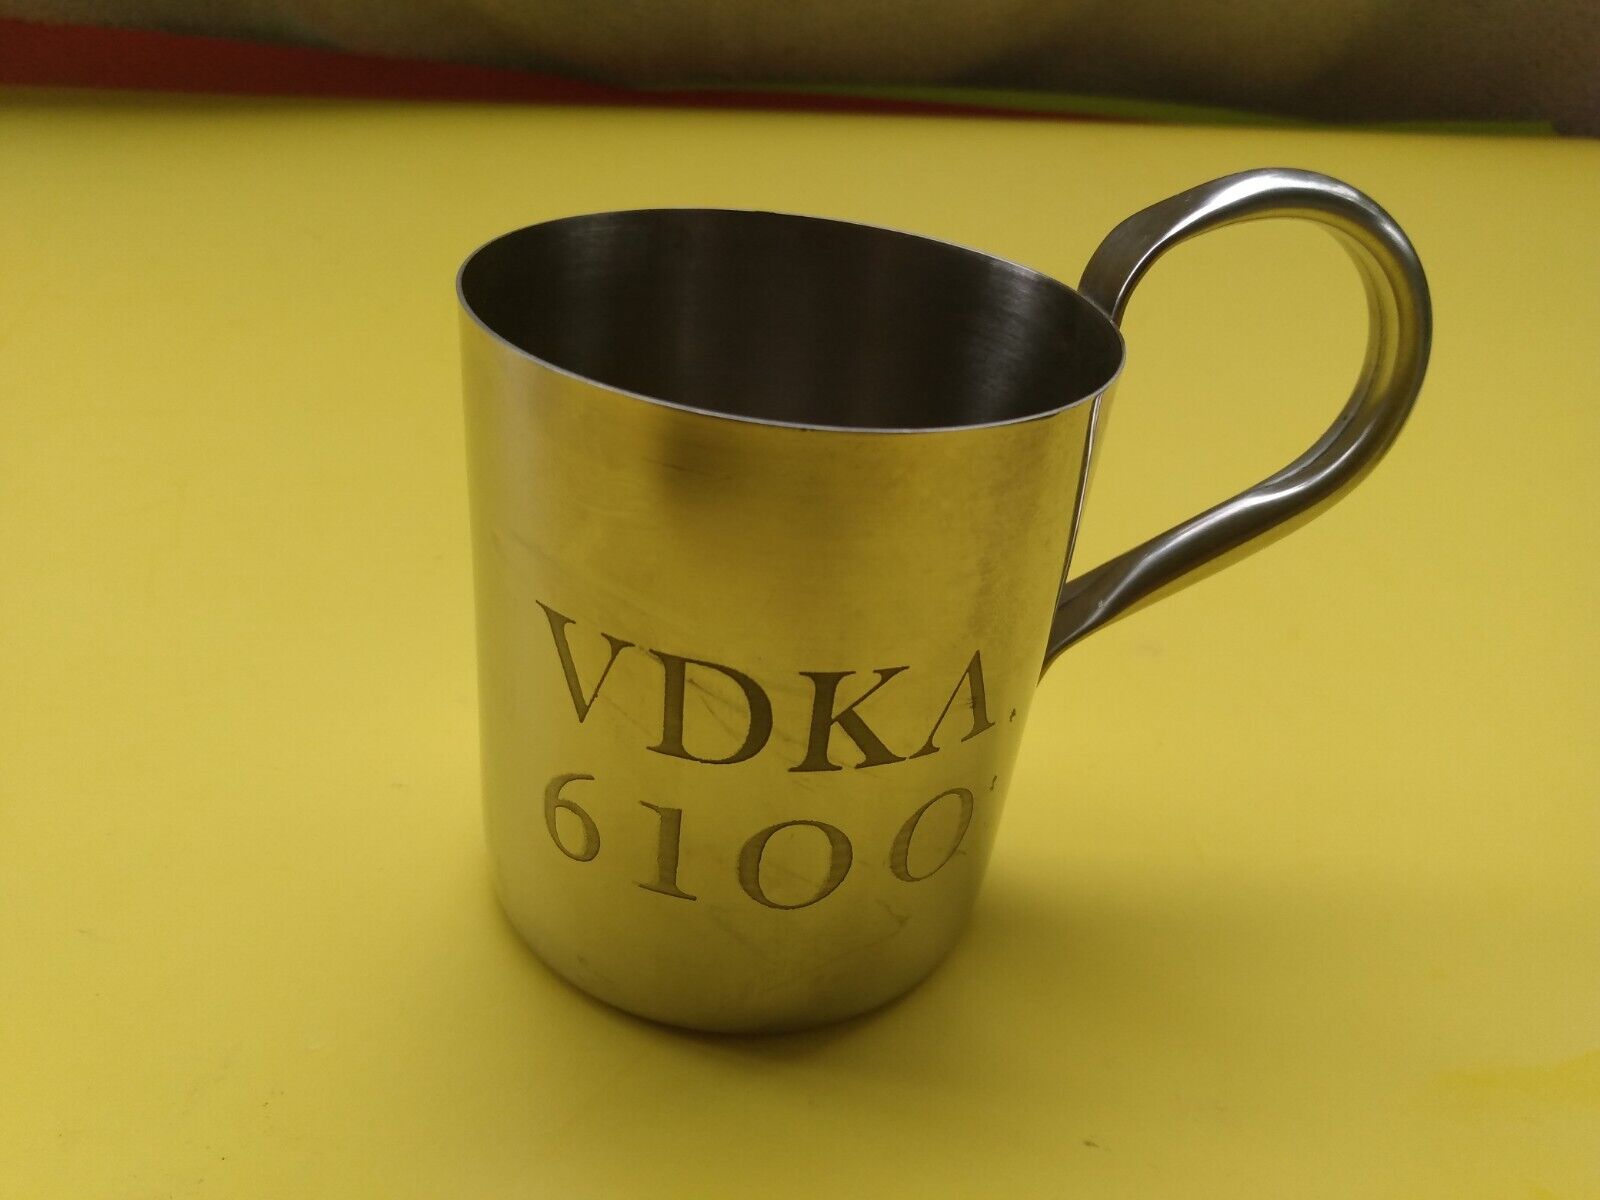 Stainless Steel High Quality Non Magnetic Vodka 6100 Mule Mug 